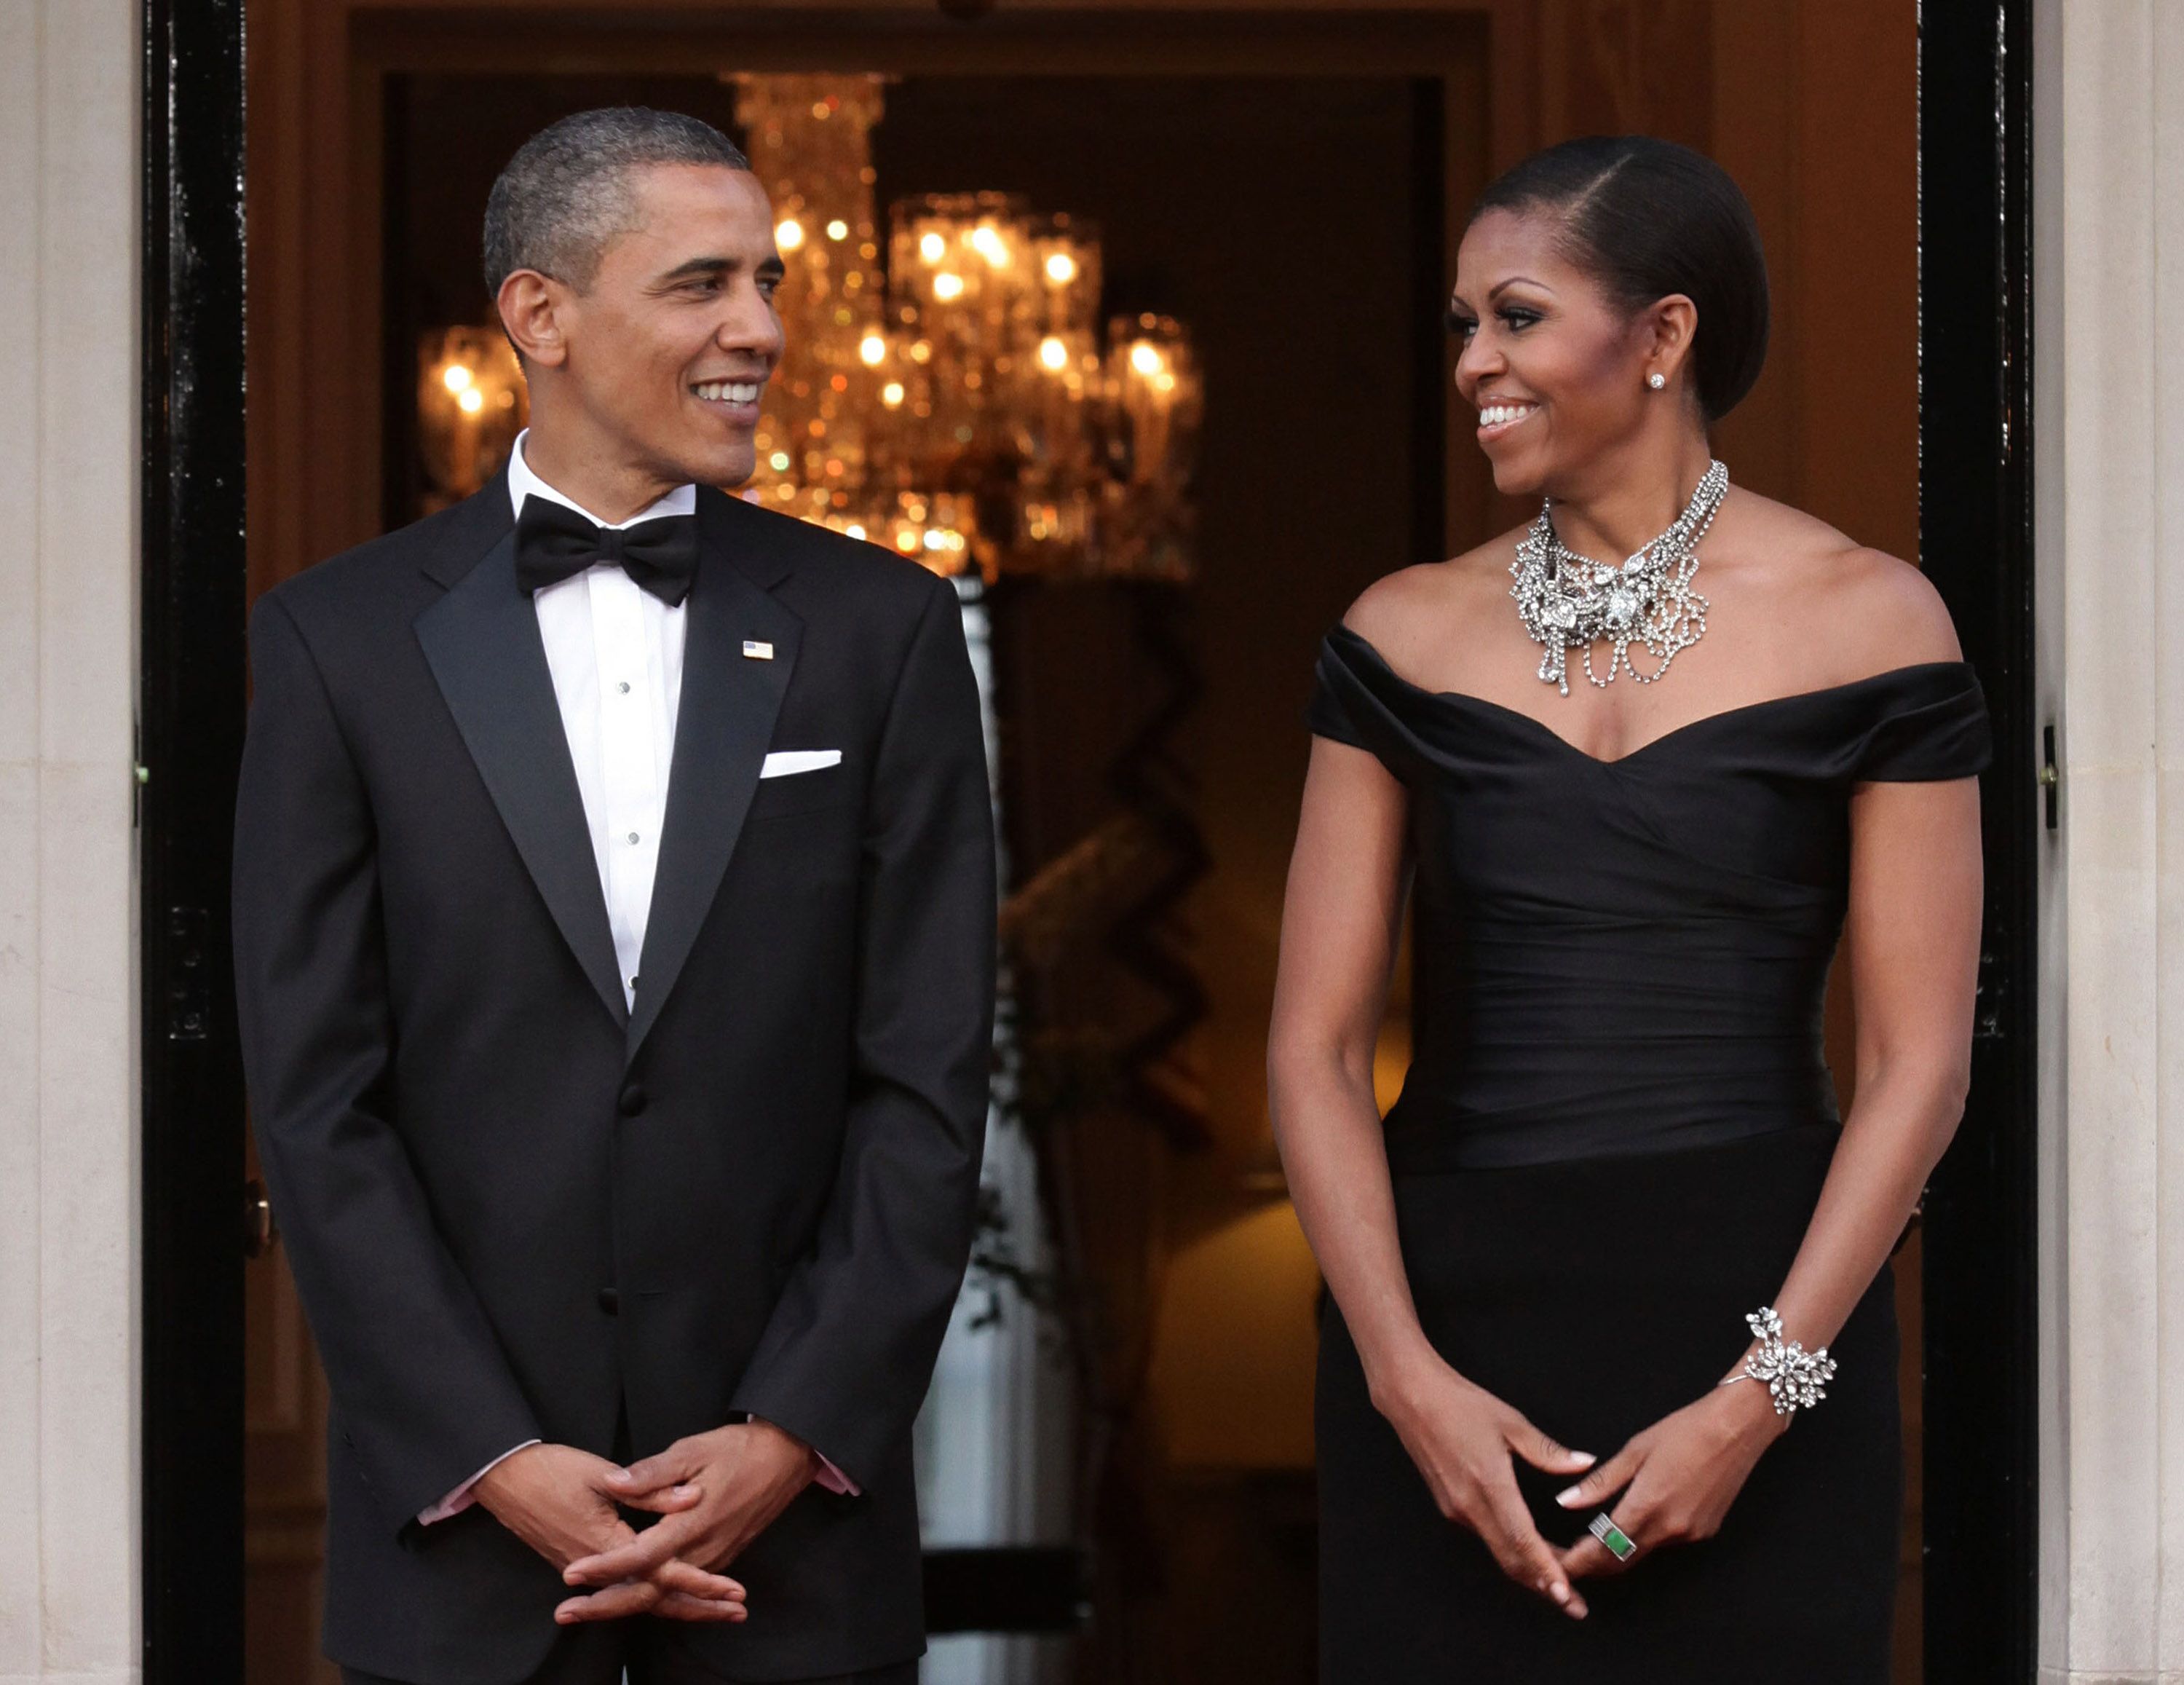 How Barack and Michelle Obama Reconciled After the White House